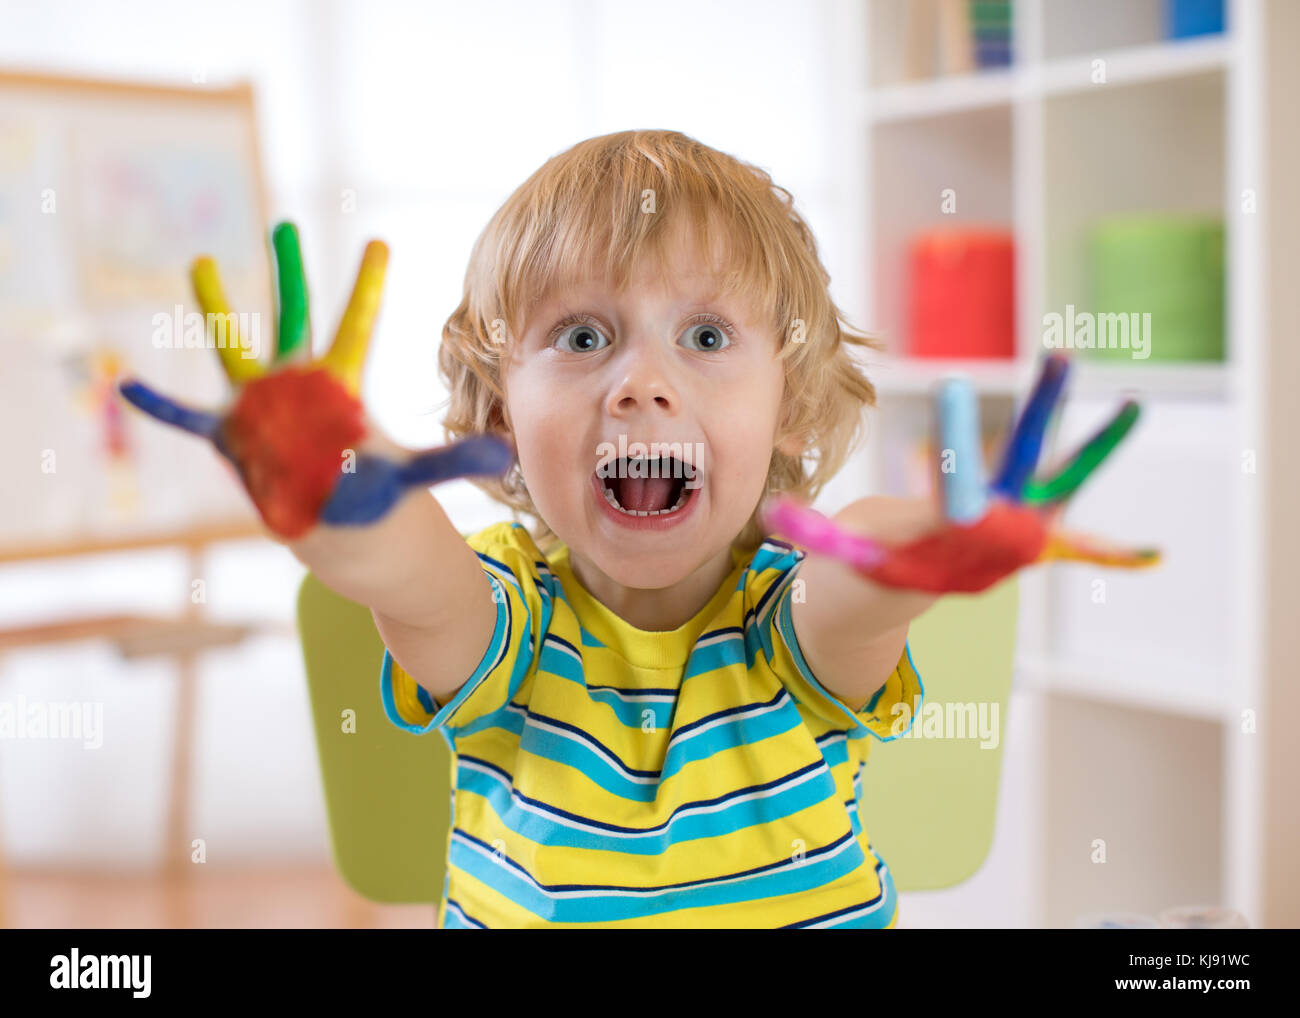 Child boy draws with hands and shows multi-colored painted palms. Children's educational games with paints. Stock Photo